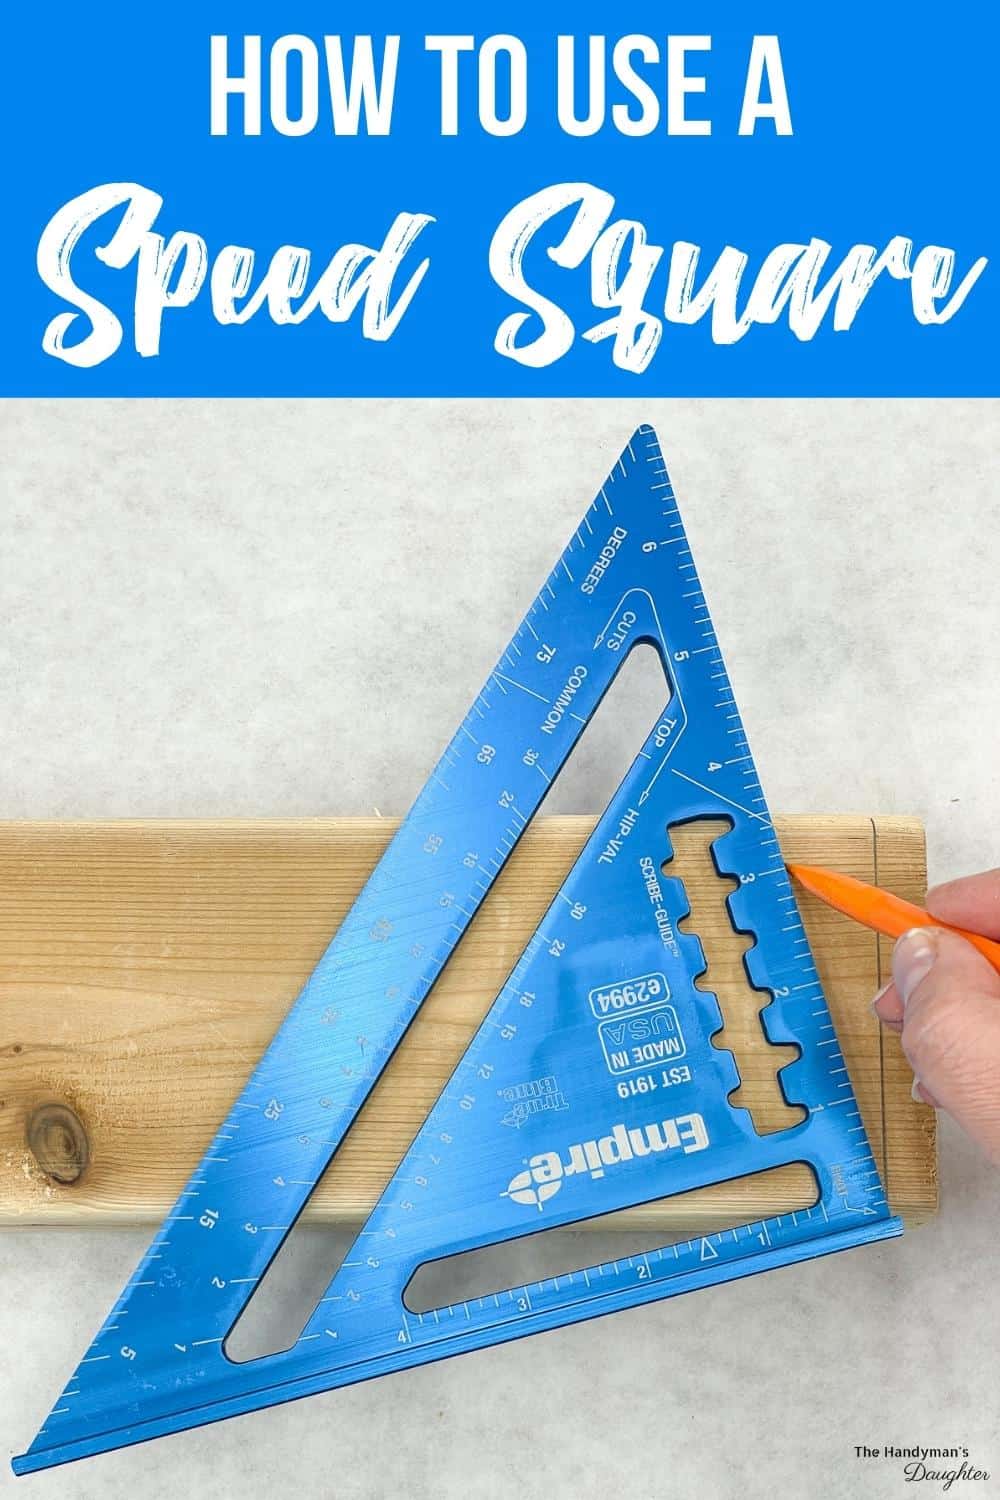 How to Use a Speed Square